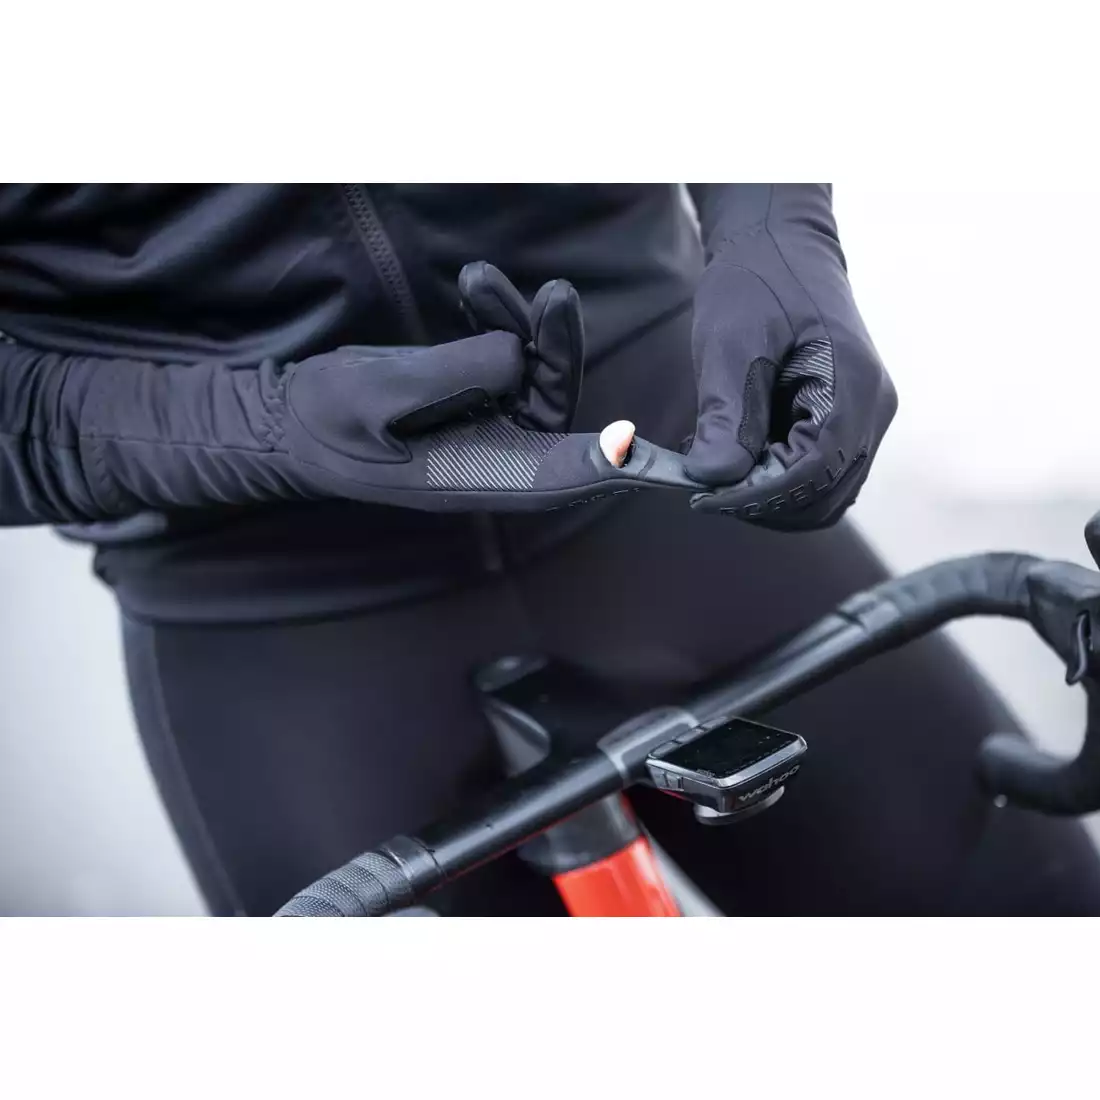 Rogelli PRIME winter cycling gloves, black